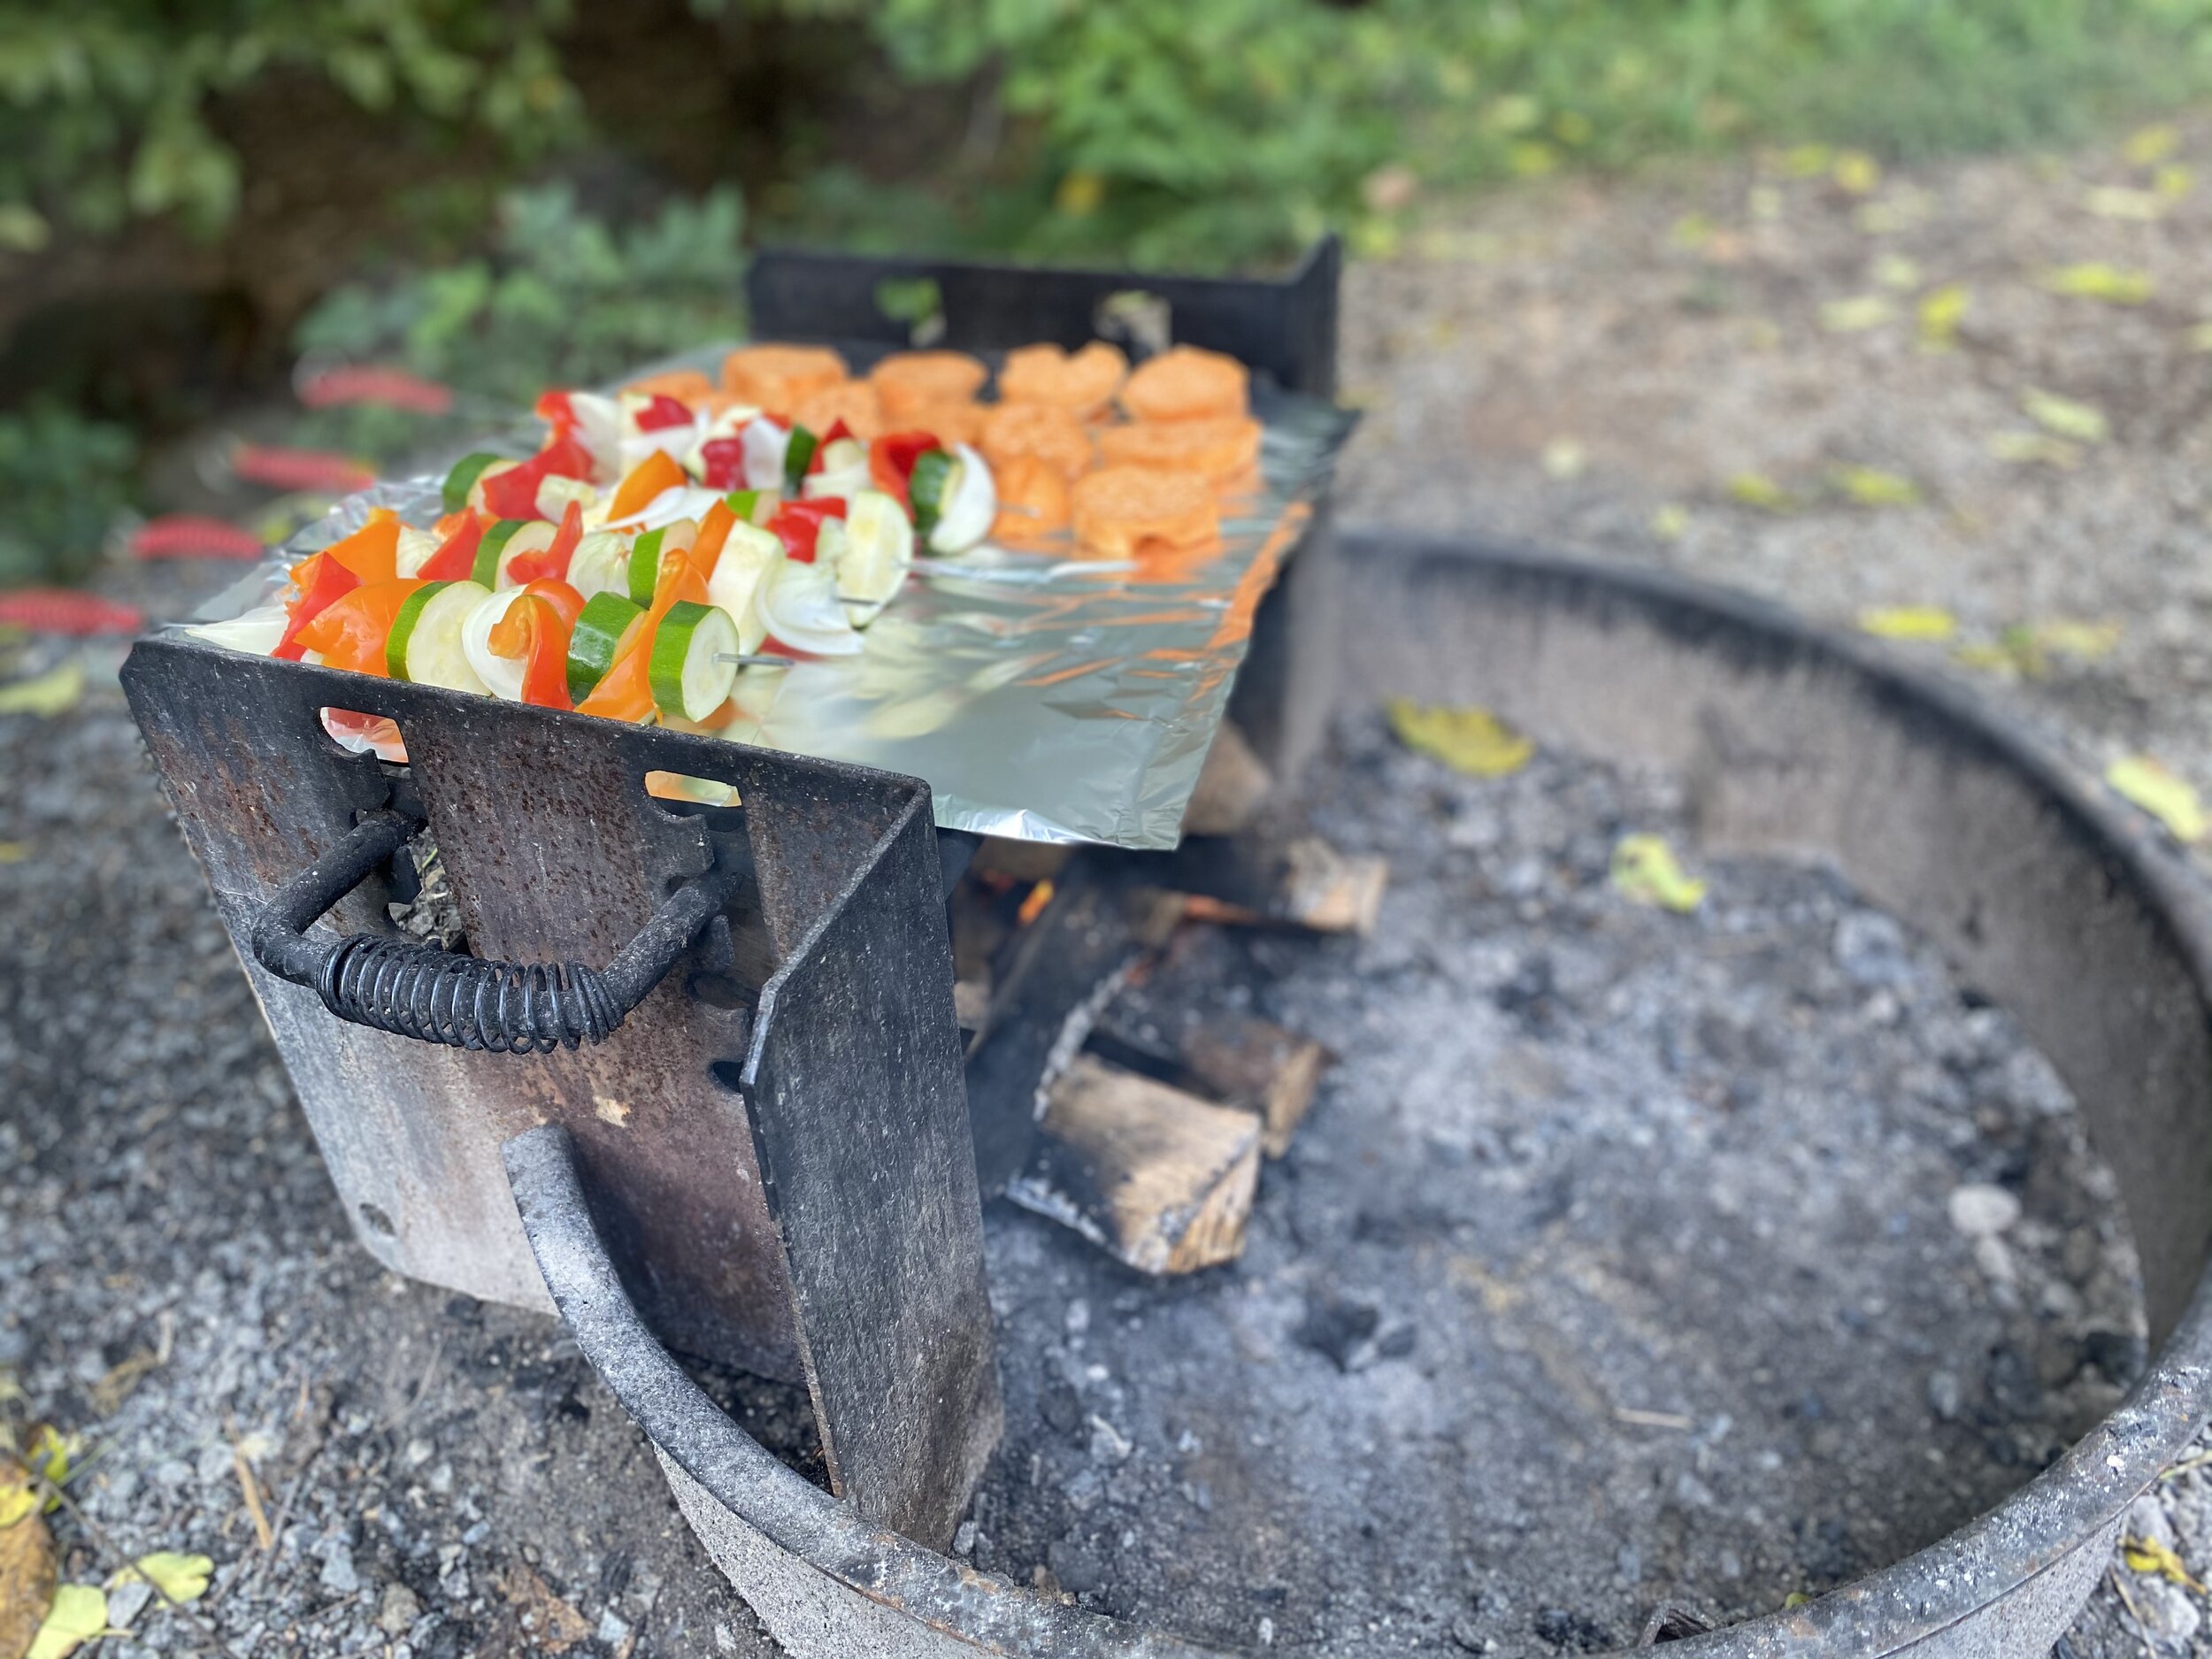 Outdoor grill with vegetable skewers grilling